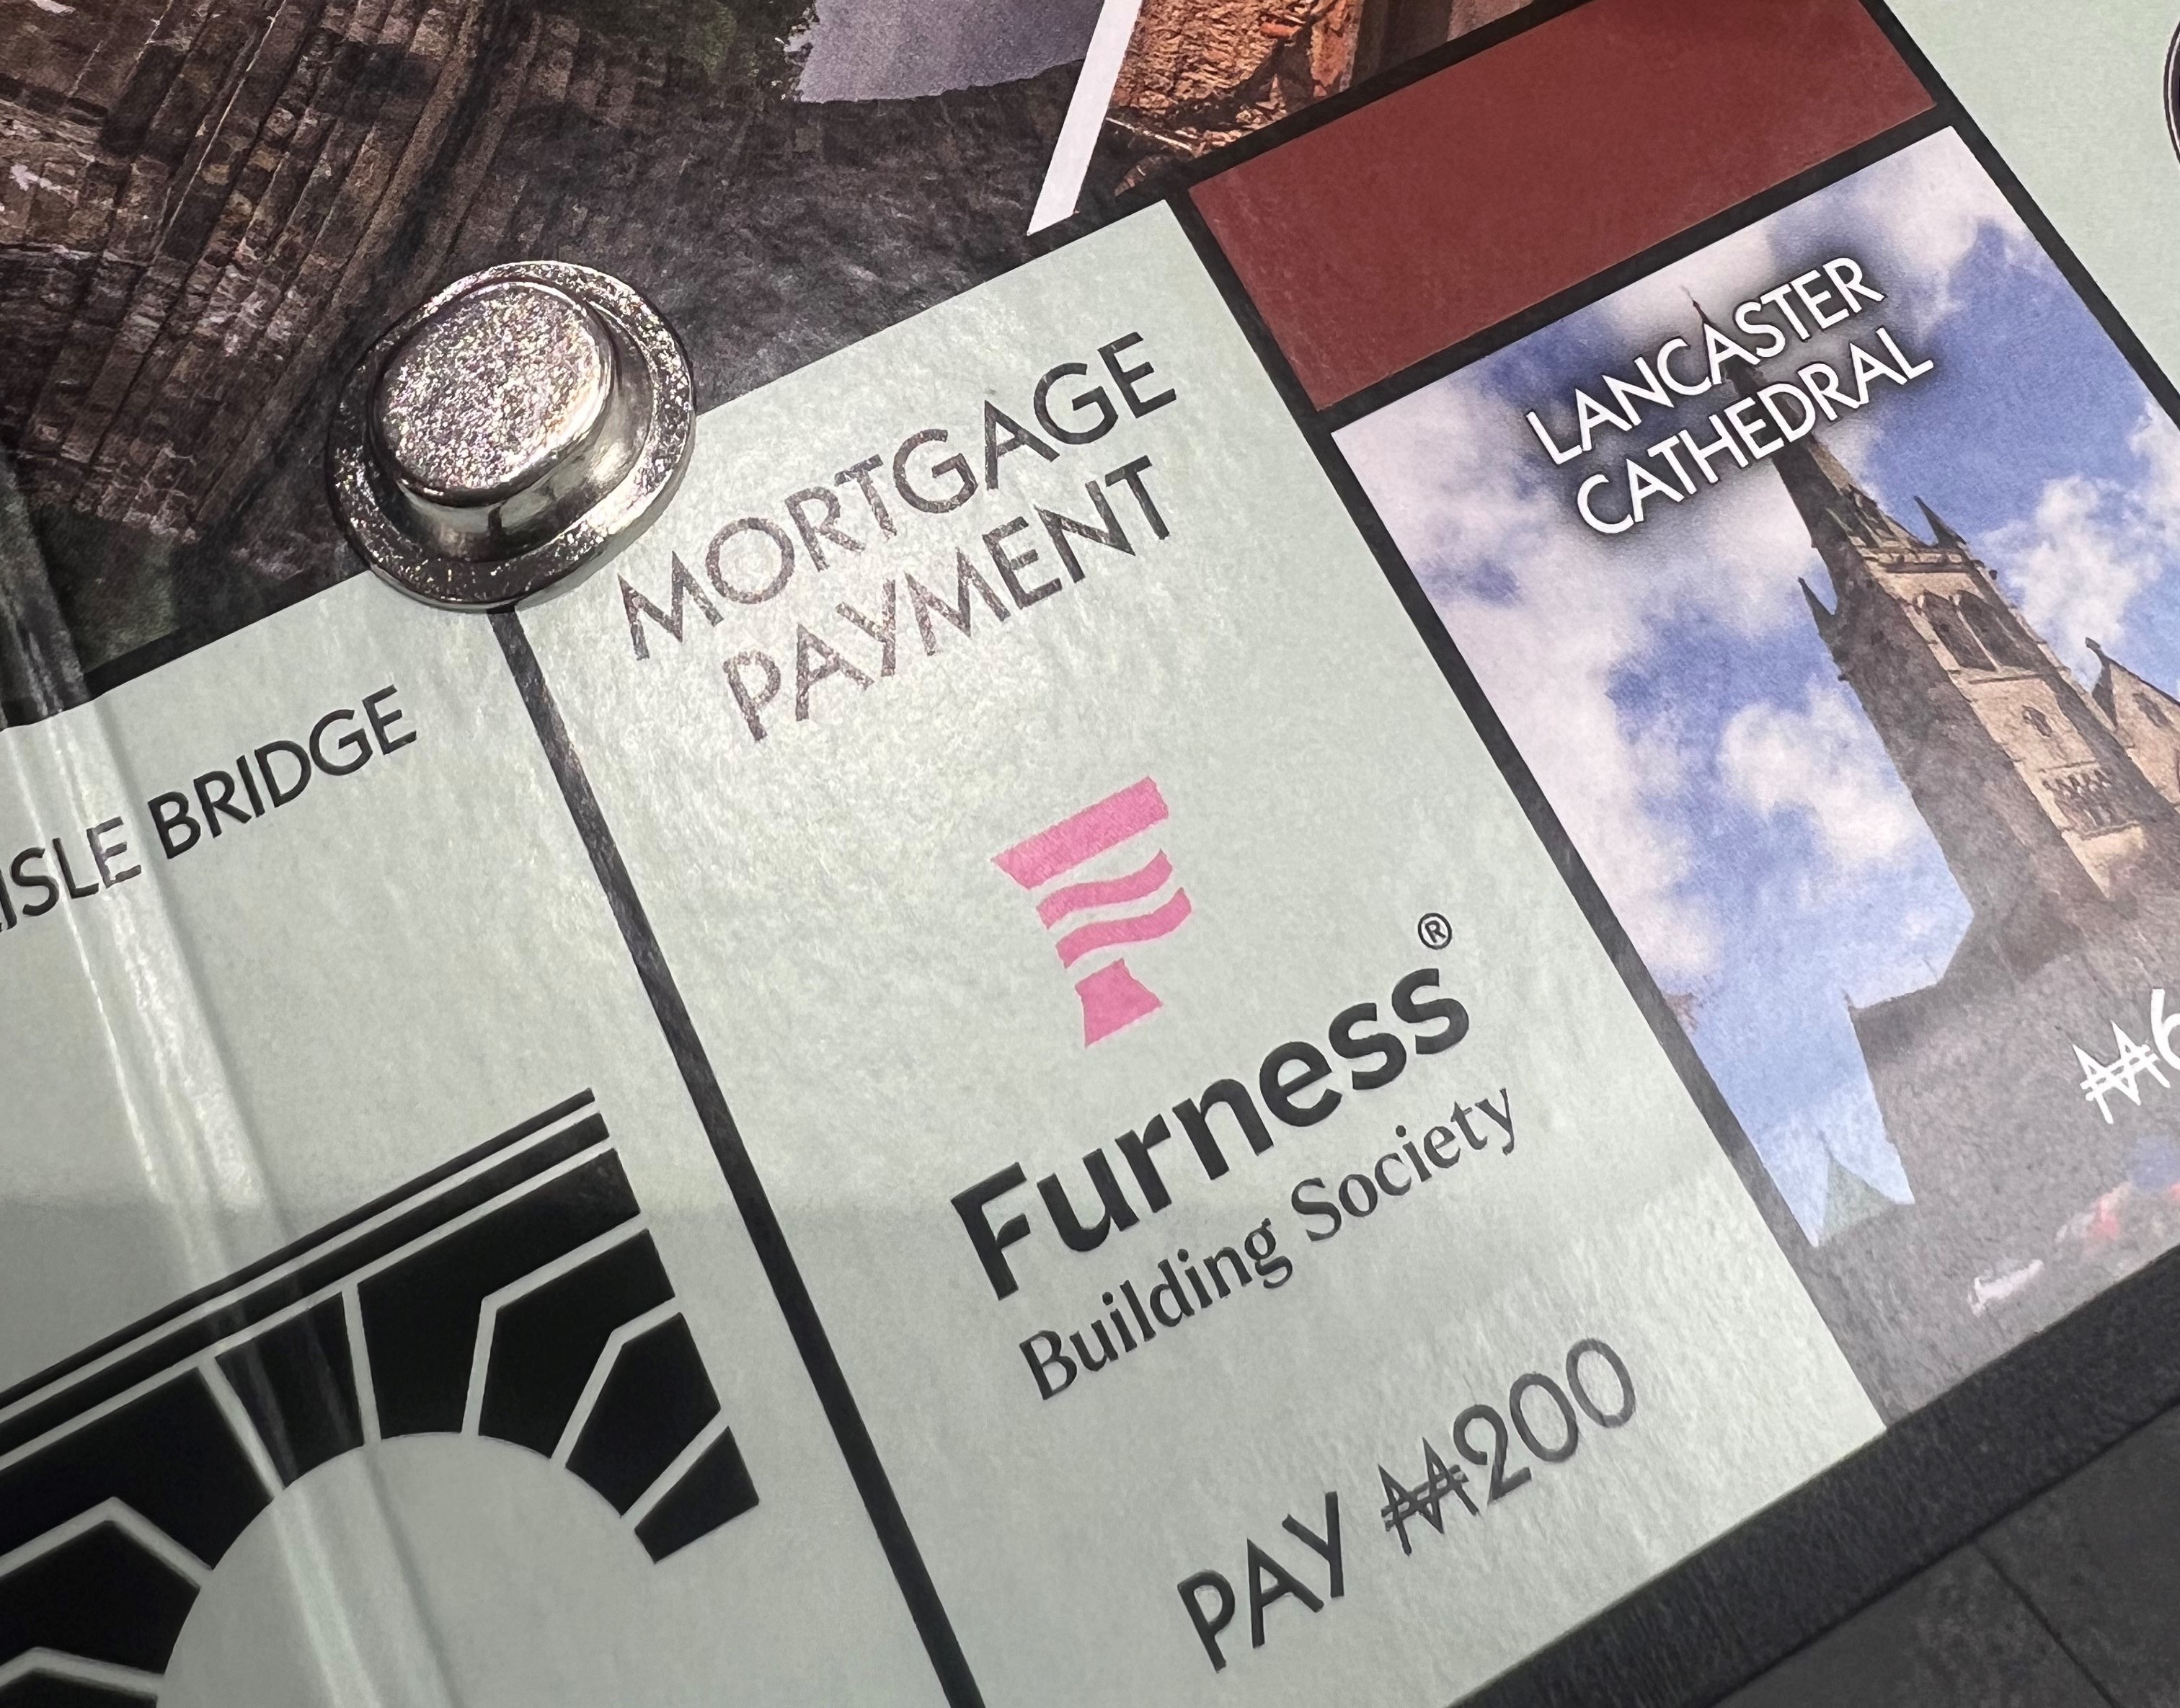 Furness building society monopoly square